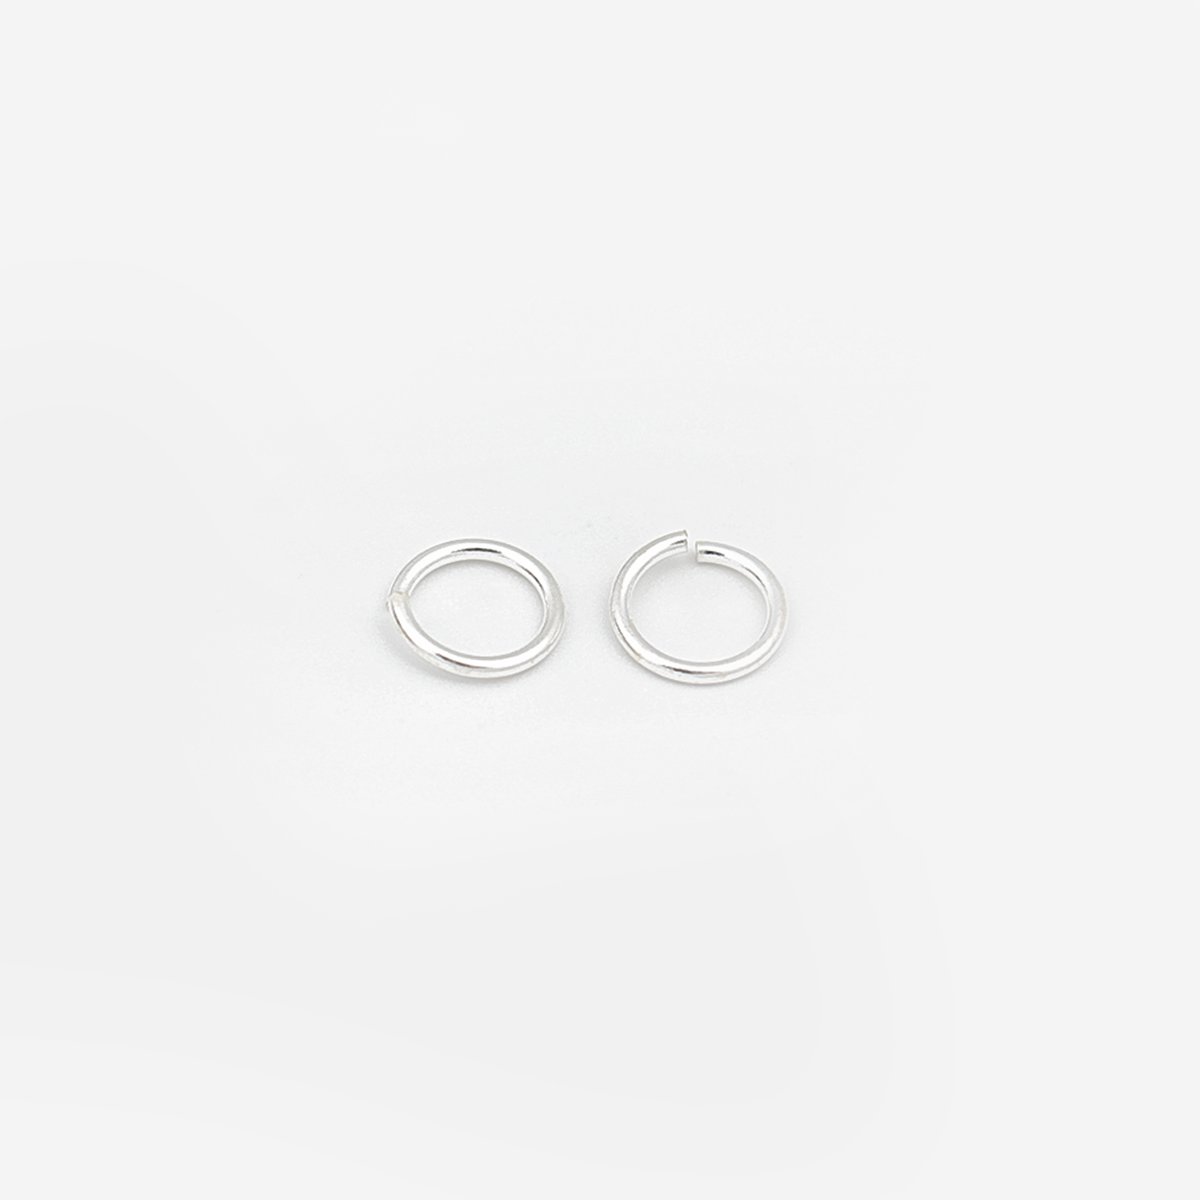 Picture of 1mm Sterling Silver Open Jump Rings Findings Round Silver 8mm Dia., 1 Gram (Approx 5-6 PCs)